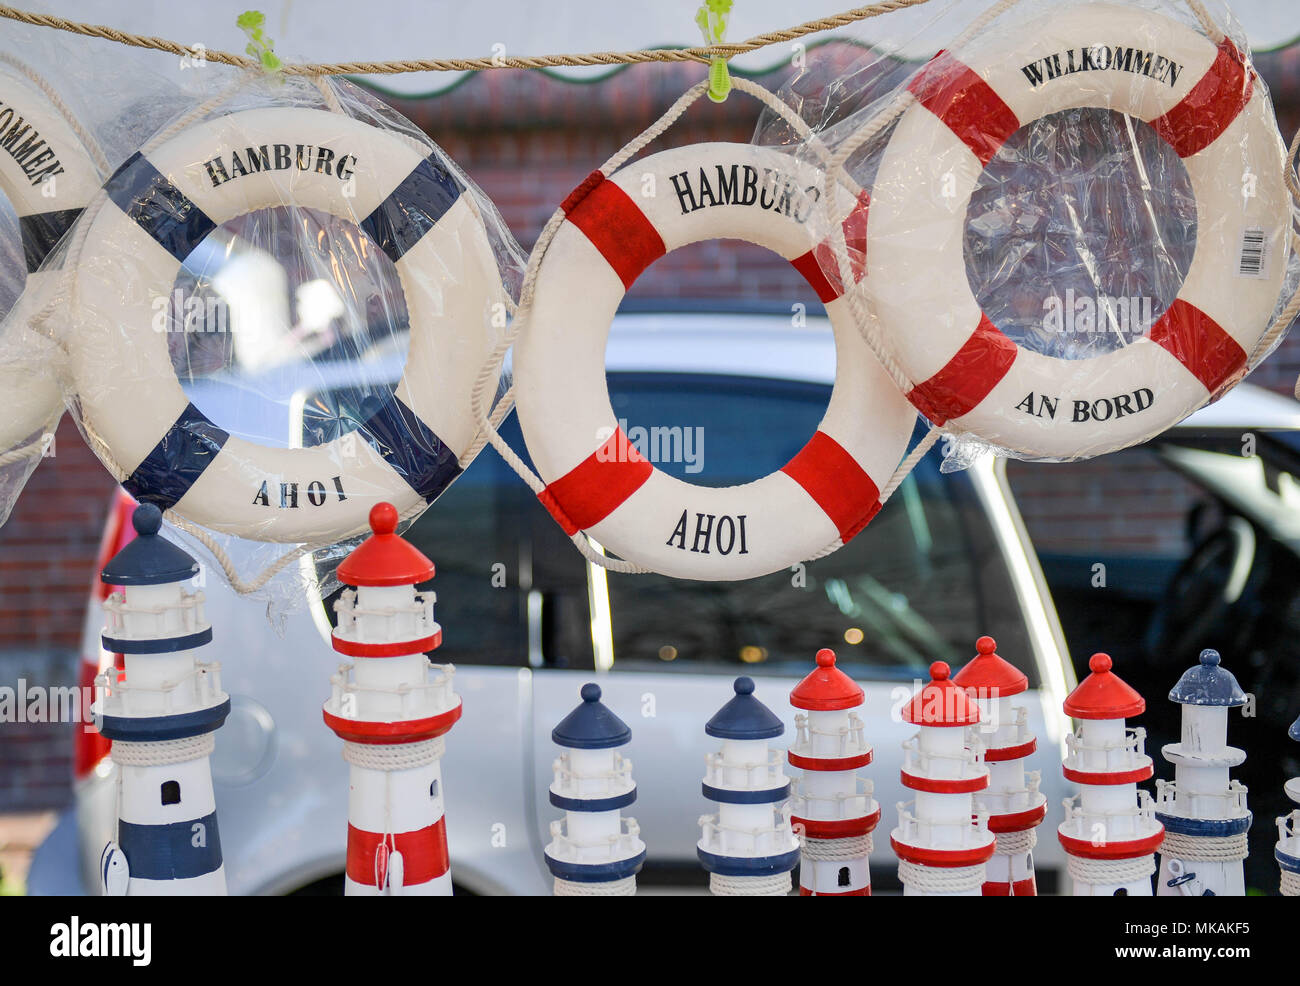 06 May 2018, Germany, Hamburg: Souvenirs from Hamburg on sale at Hamburg's fish market. Hamburg's fish market attracts 70,000 visitors every sunday. The market's famous barkers offer their goods to revelers, tourists and early risers and provide a one-of-a-kind atmosphere. Photo: Axel Heimken/dpa Stock Photo